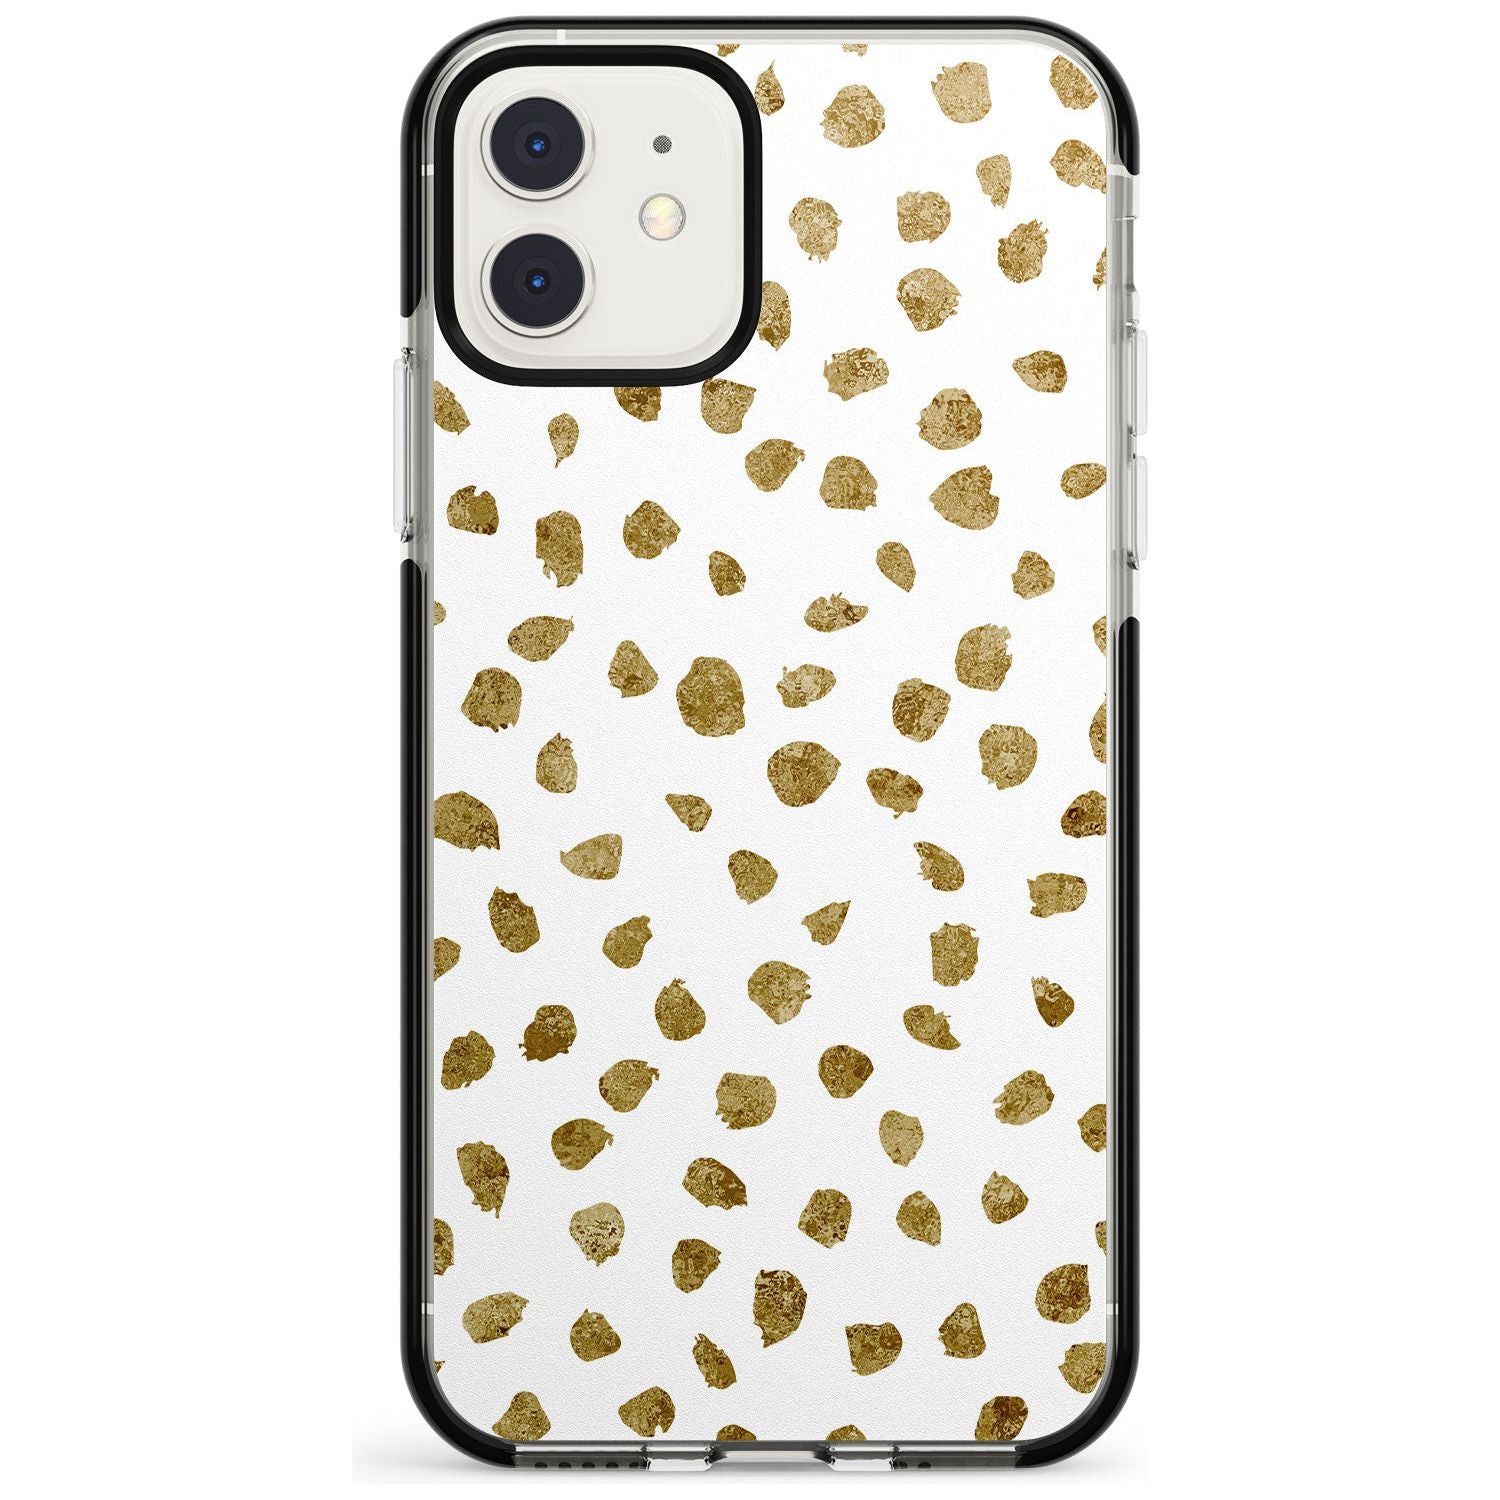 Gold Look on White Dalmatian Polka Dot Spots Black Impact Phone Case for iPhone 11